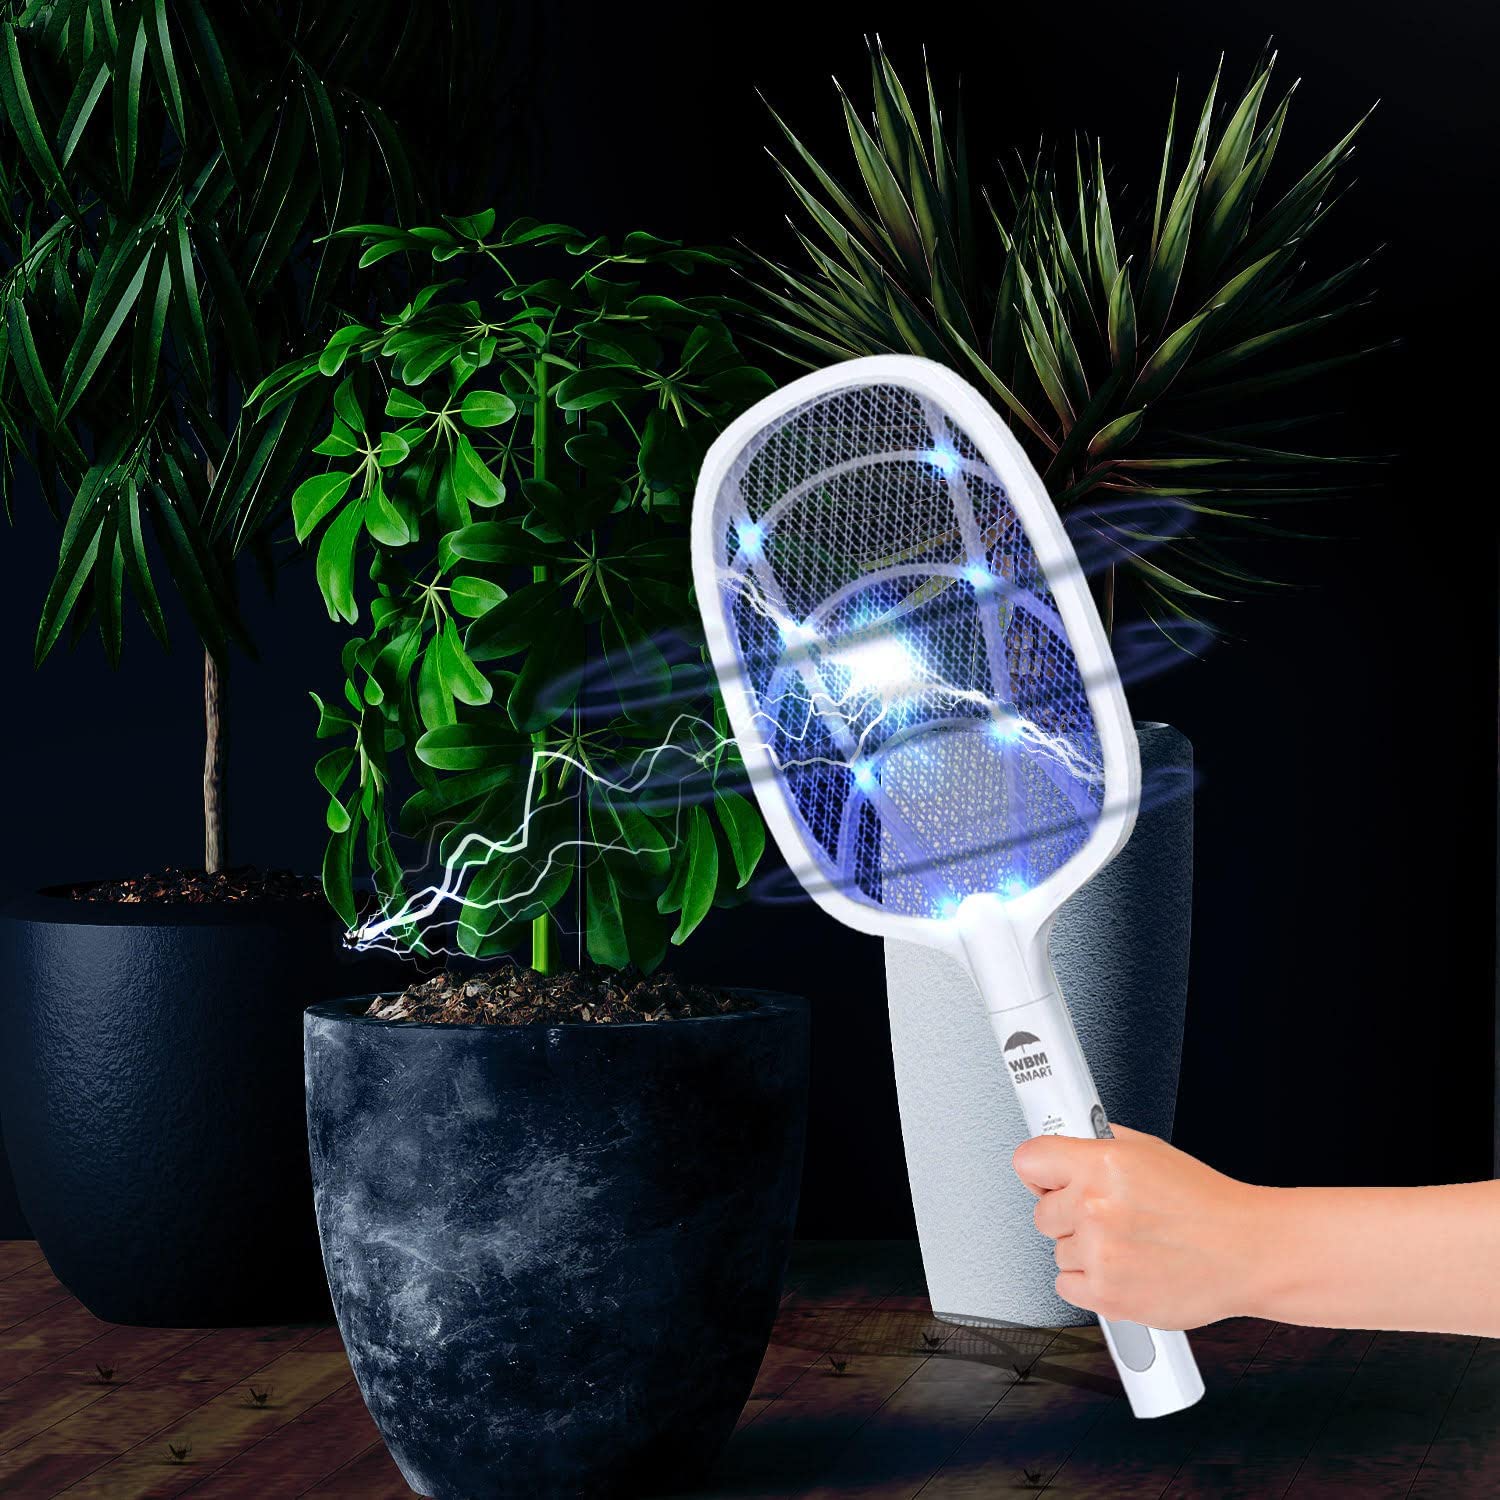 Magic Mesh 2 in 1 Bug Zapper & Swatter- Rechargeable Electric Swatter &  Night Zapping Lamp- Zapping Racket Kills Mosquitos, Flies, & Insects  Outdoors or Indoors